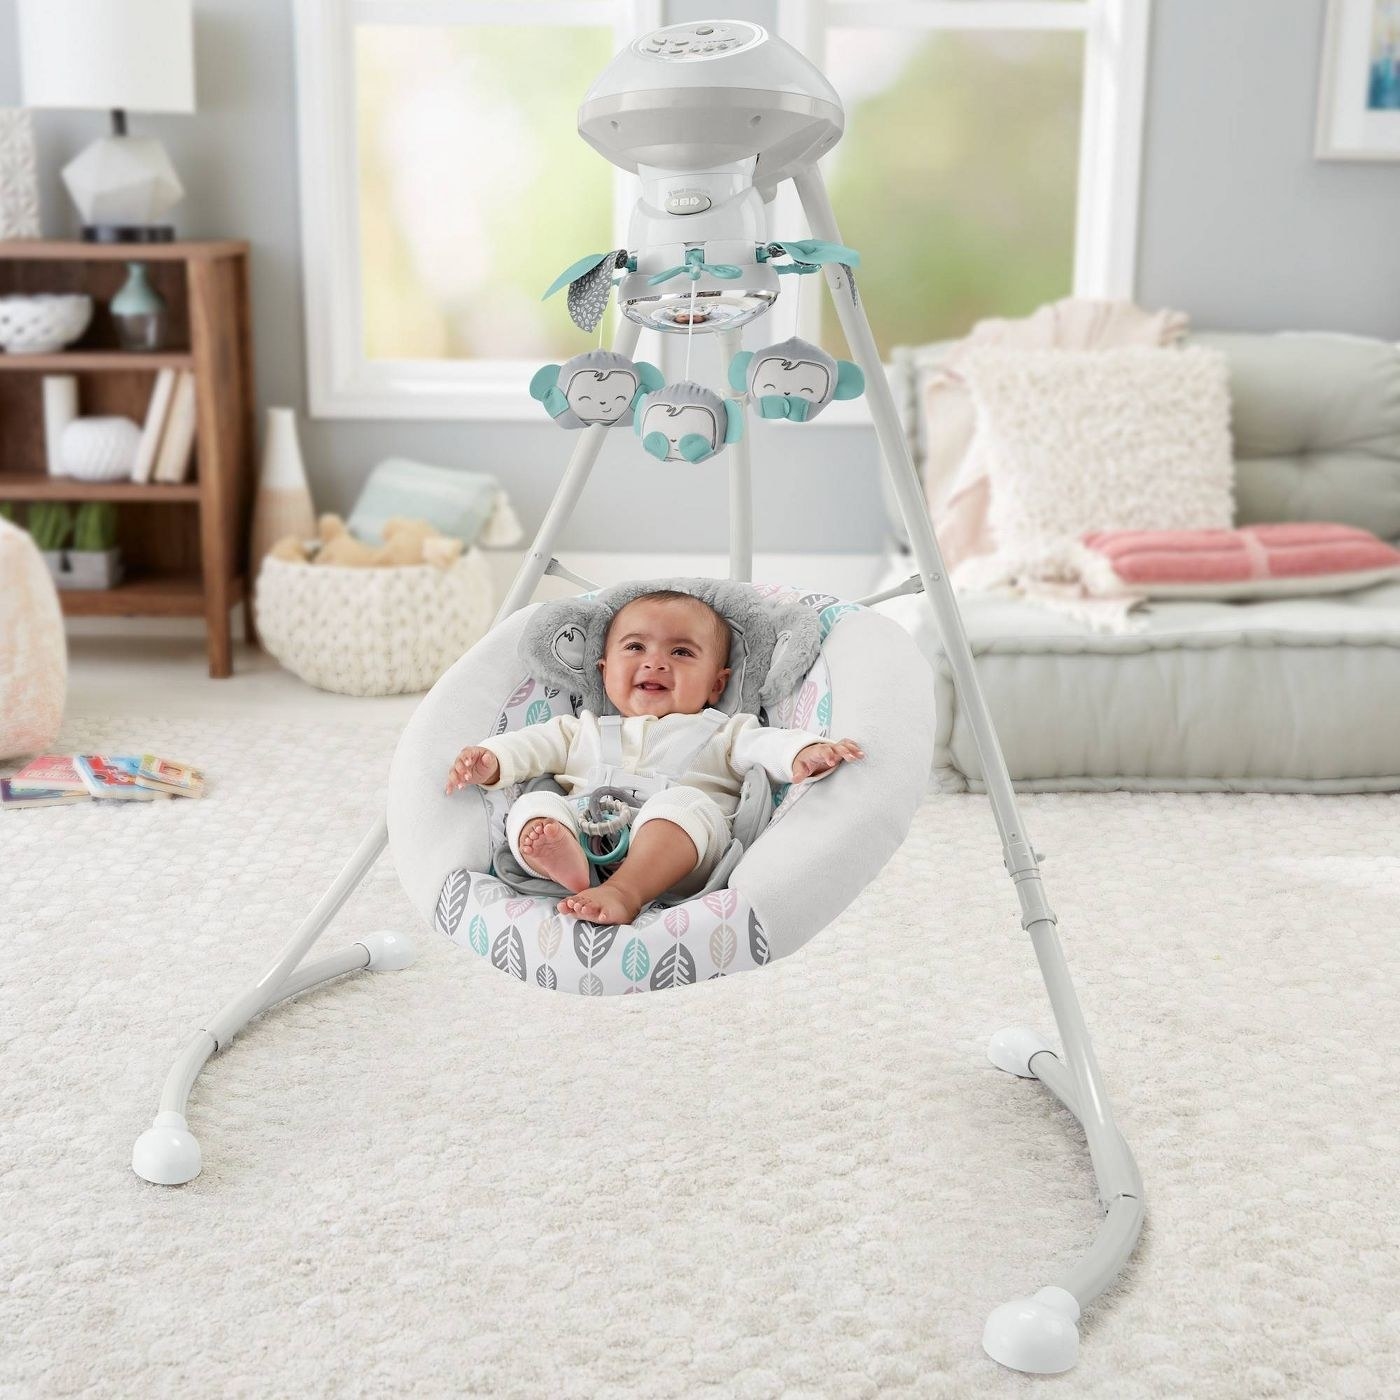 Fisherprice baby swing with baby in it